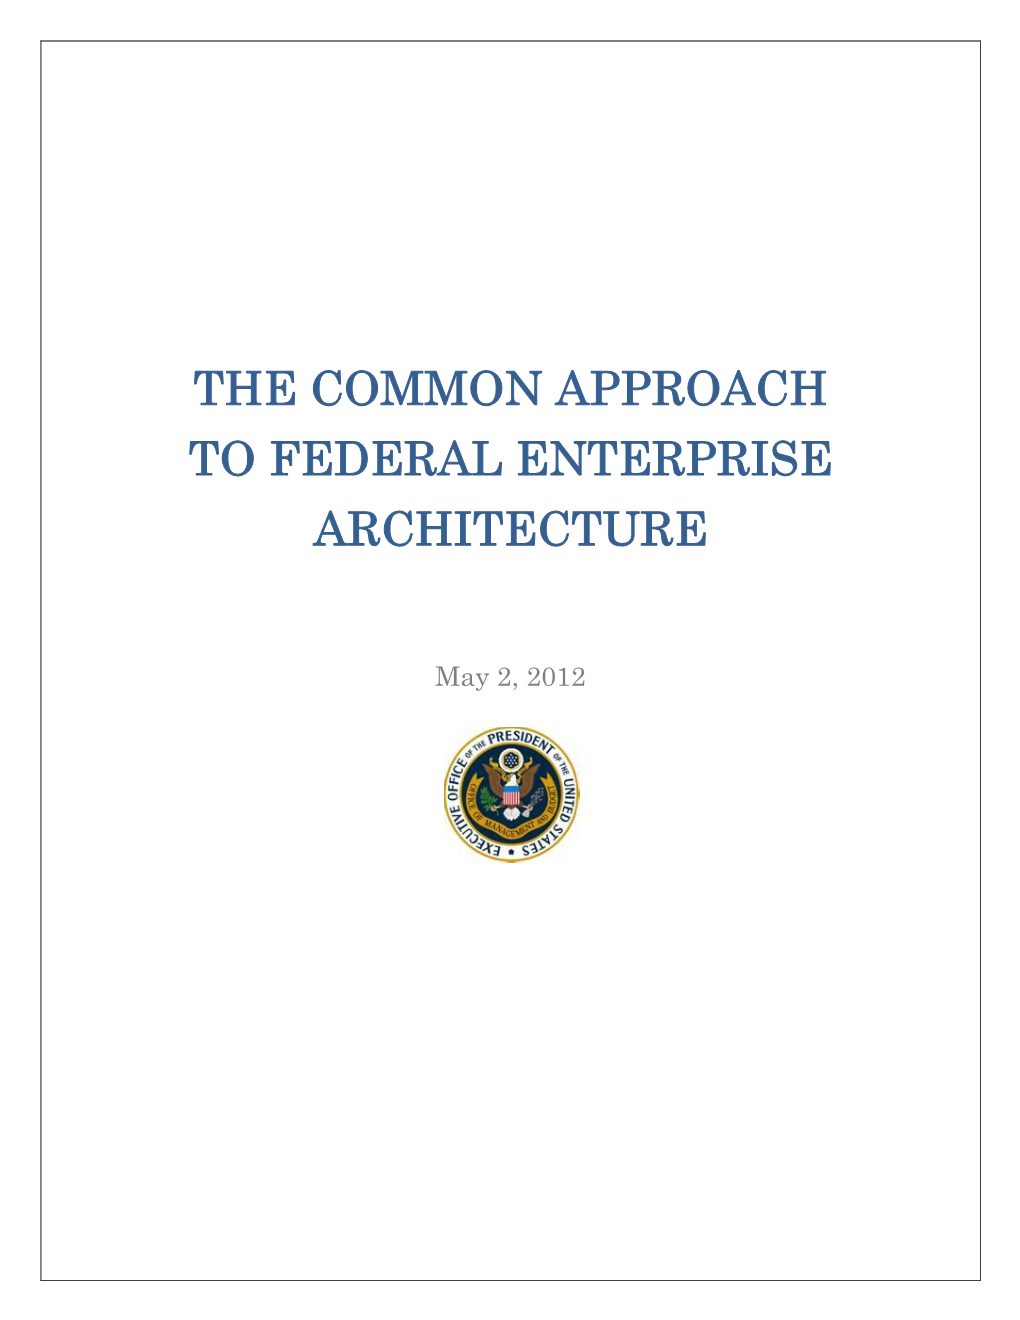 The Common Approach to Federal Enterprise Architecture